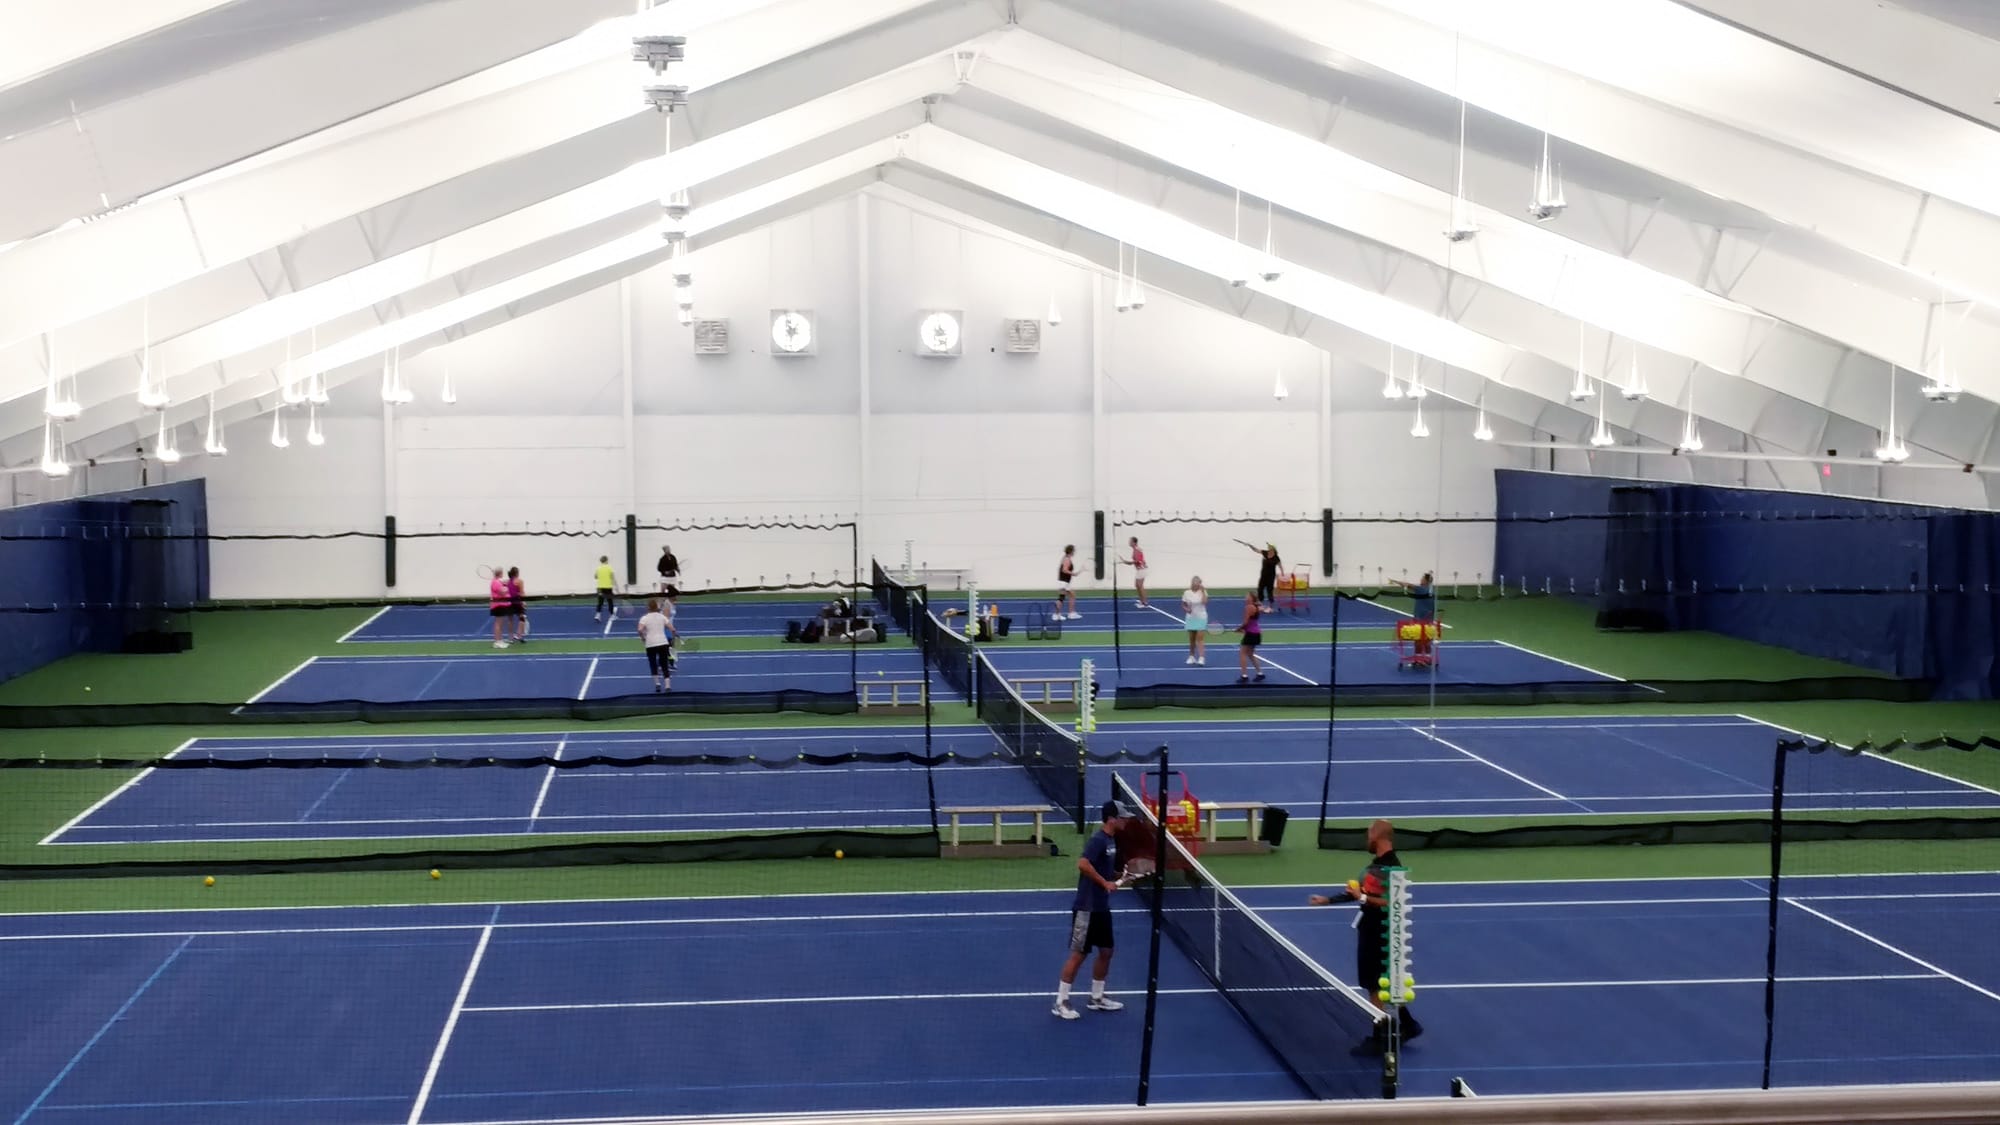 Tennis players enjoy the first hits on the renovated Vancouver Tennis Center courts after the facility's reopening on Sept. 3, 2018.